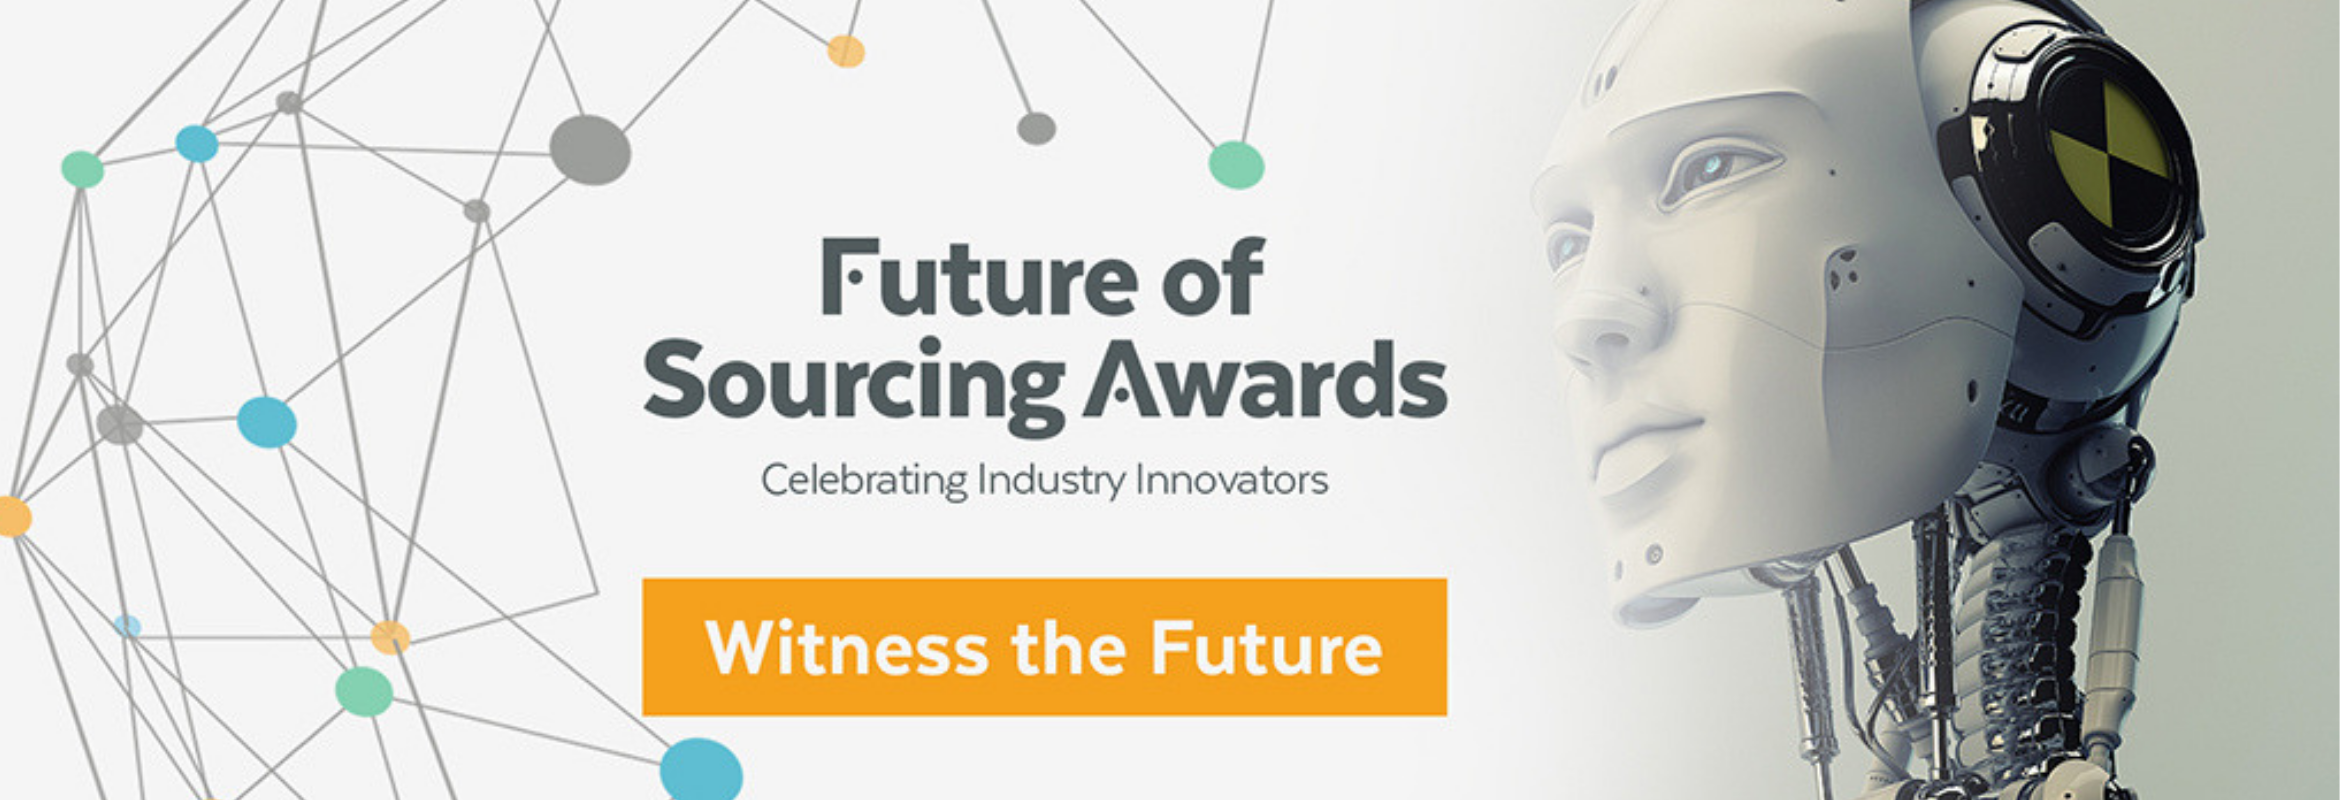 Future of Sourcing Awards Finalists Announced